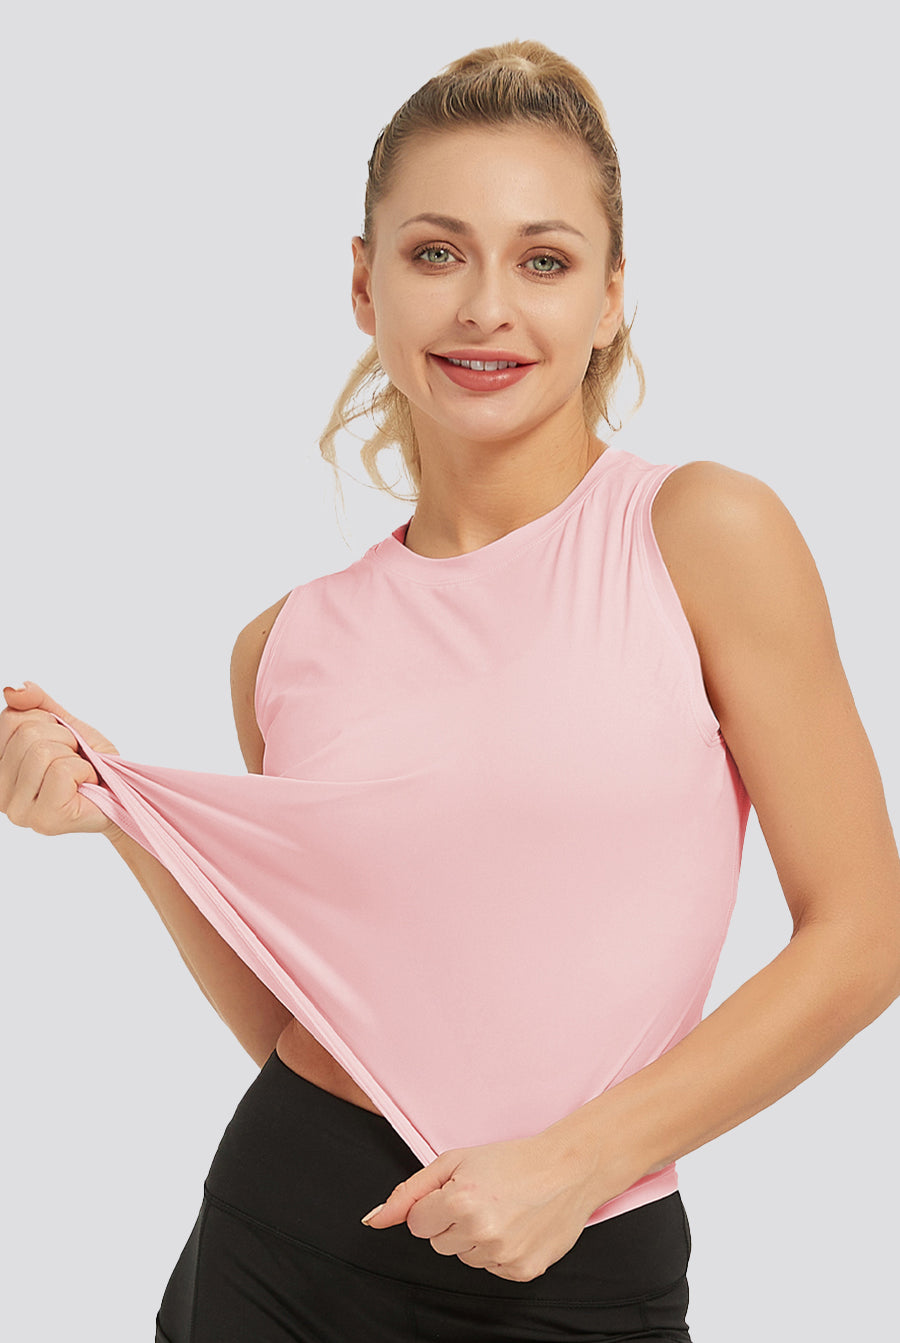 womens sleeves workout tops pink